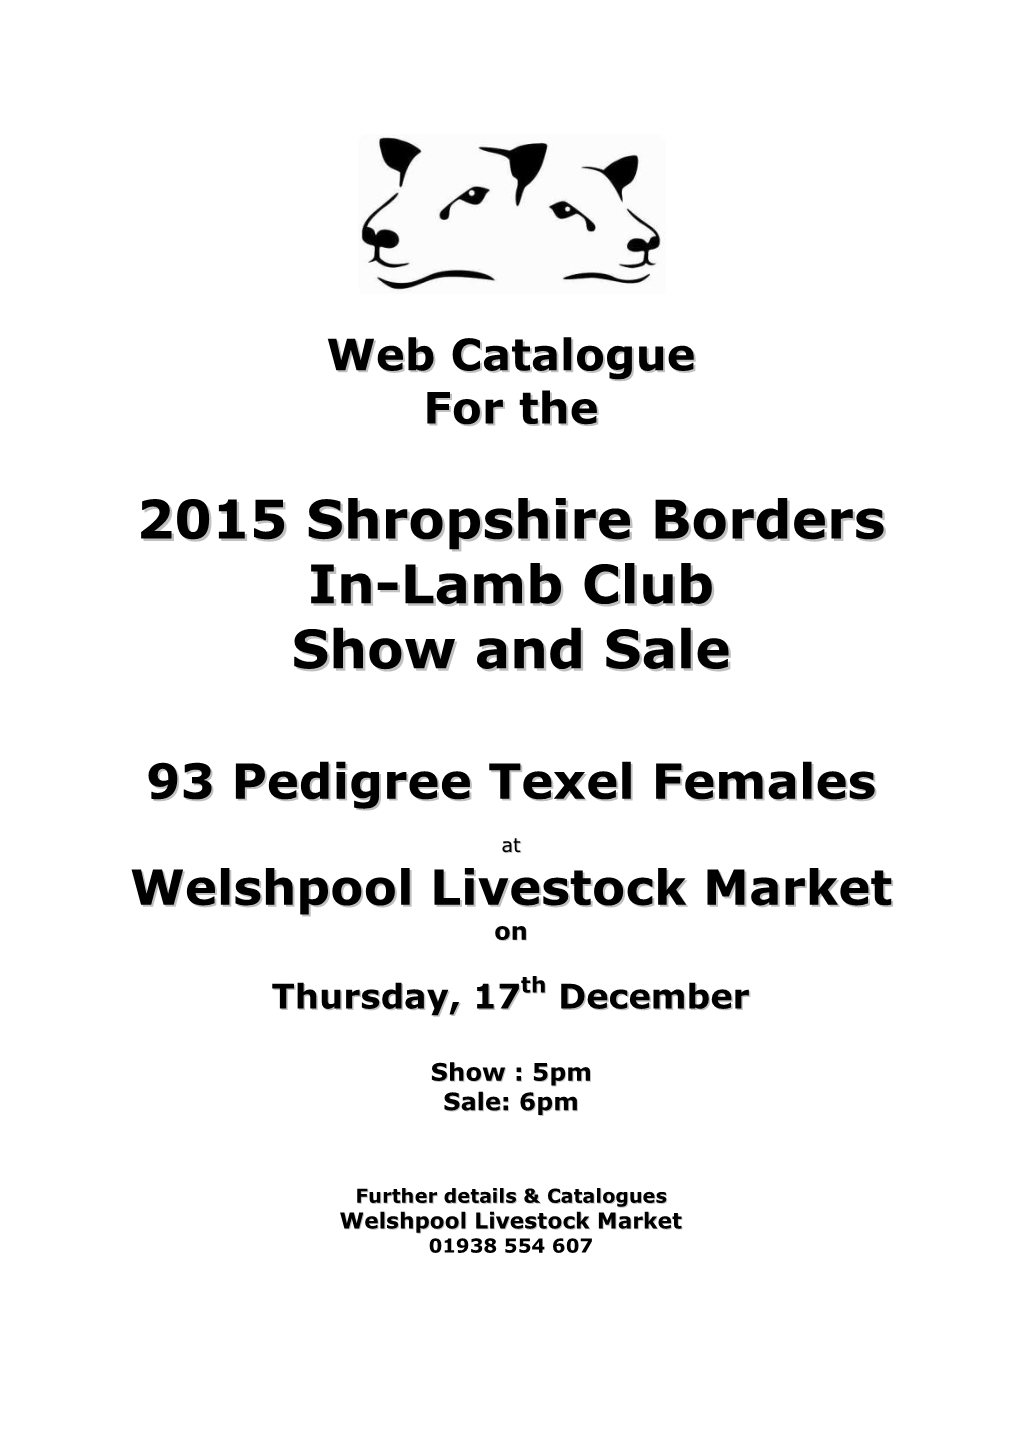 2015 Shropshire Borders In-Lamb Club Show and Sale